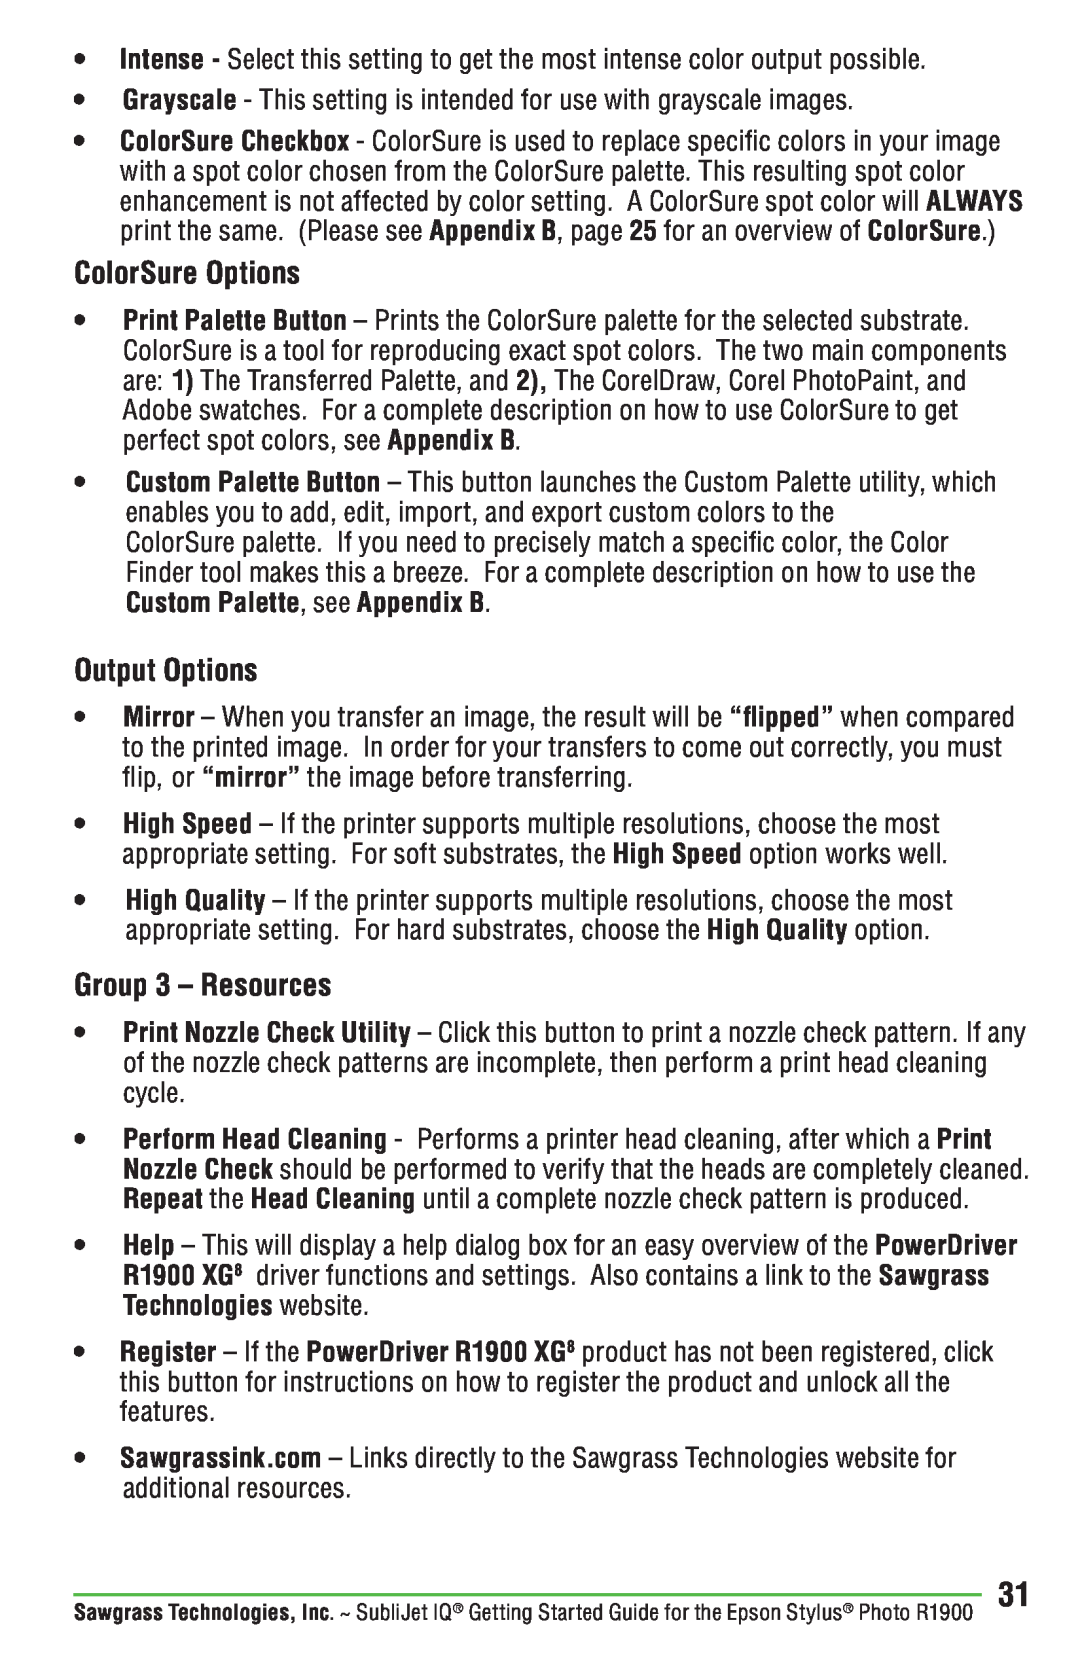 Epson R1900 manual ColorSure Options, Output Options, Group 3 - Resources 